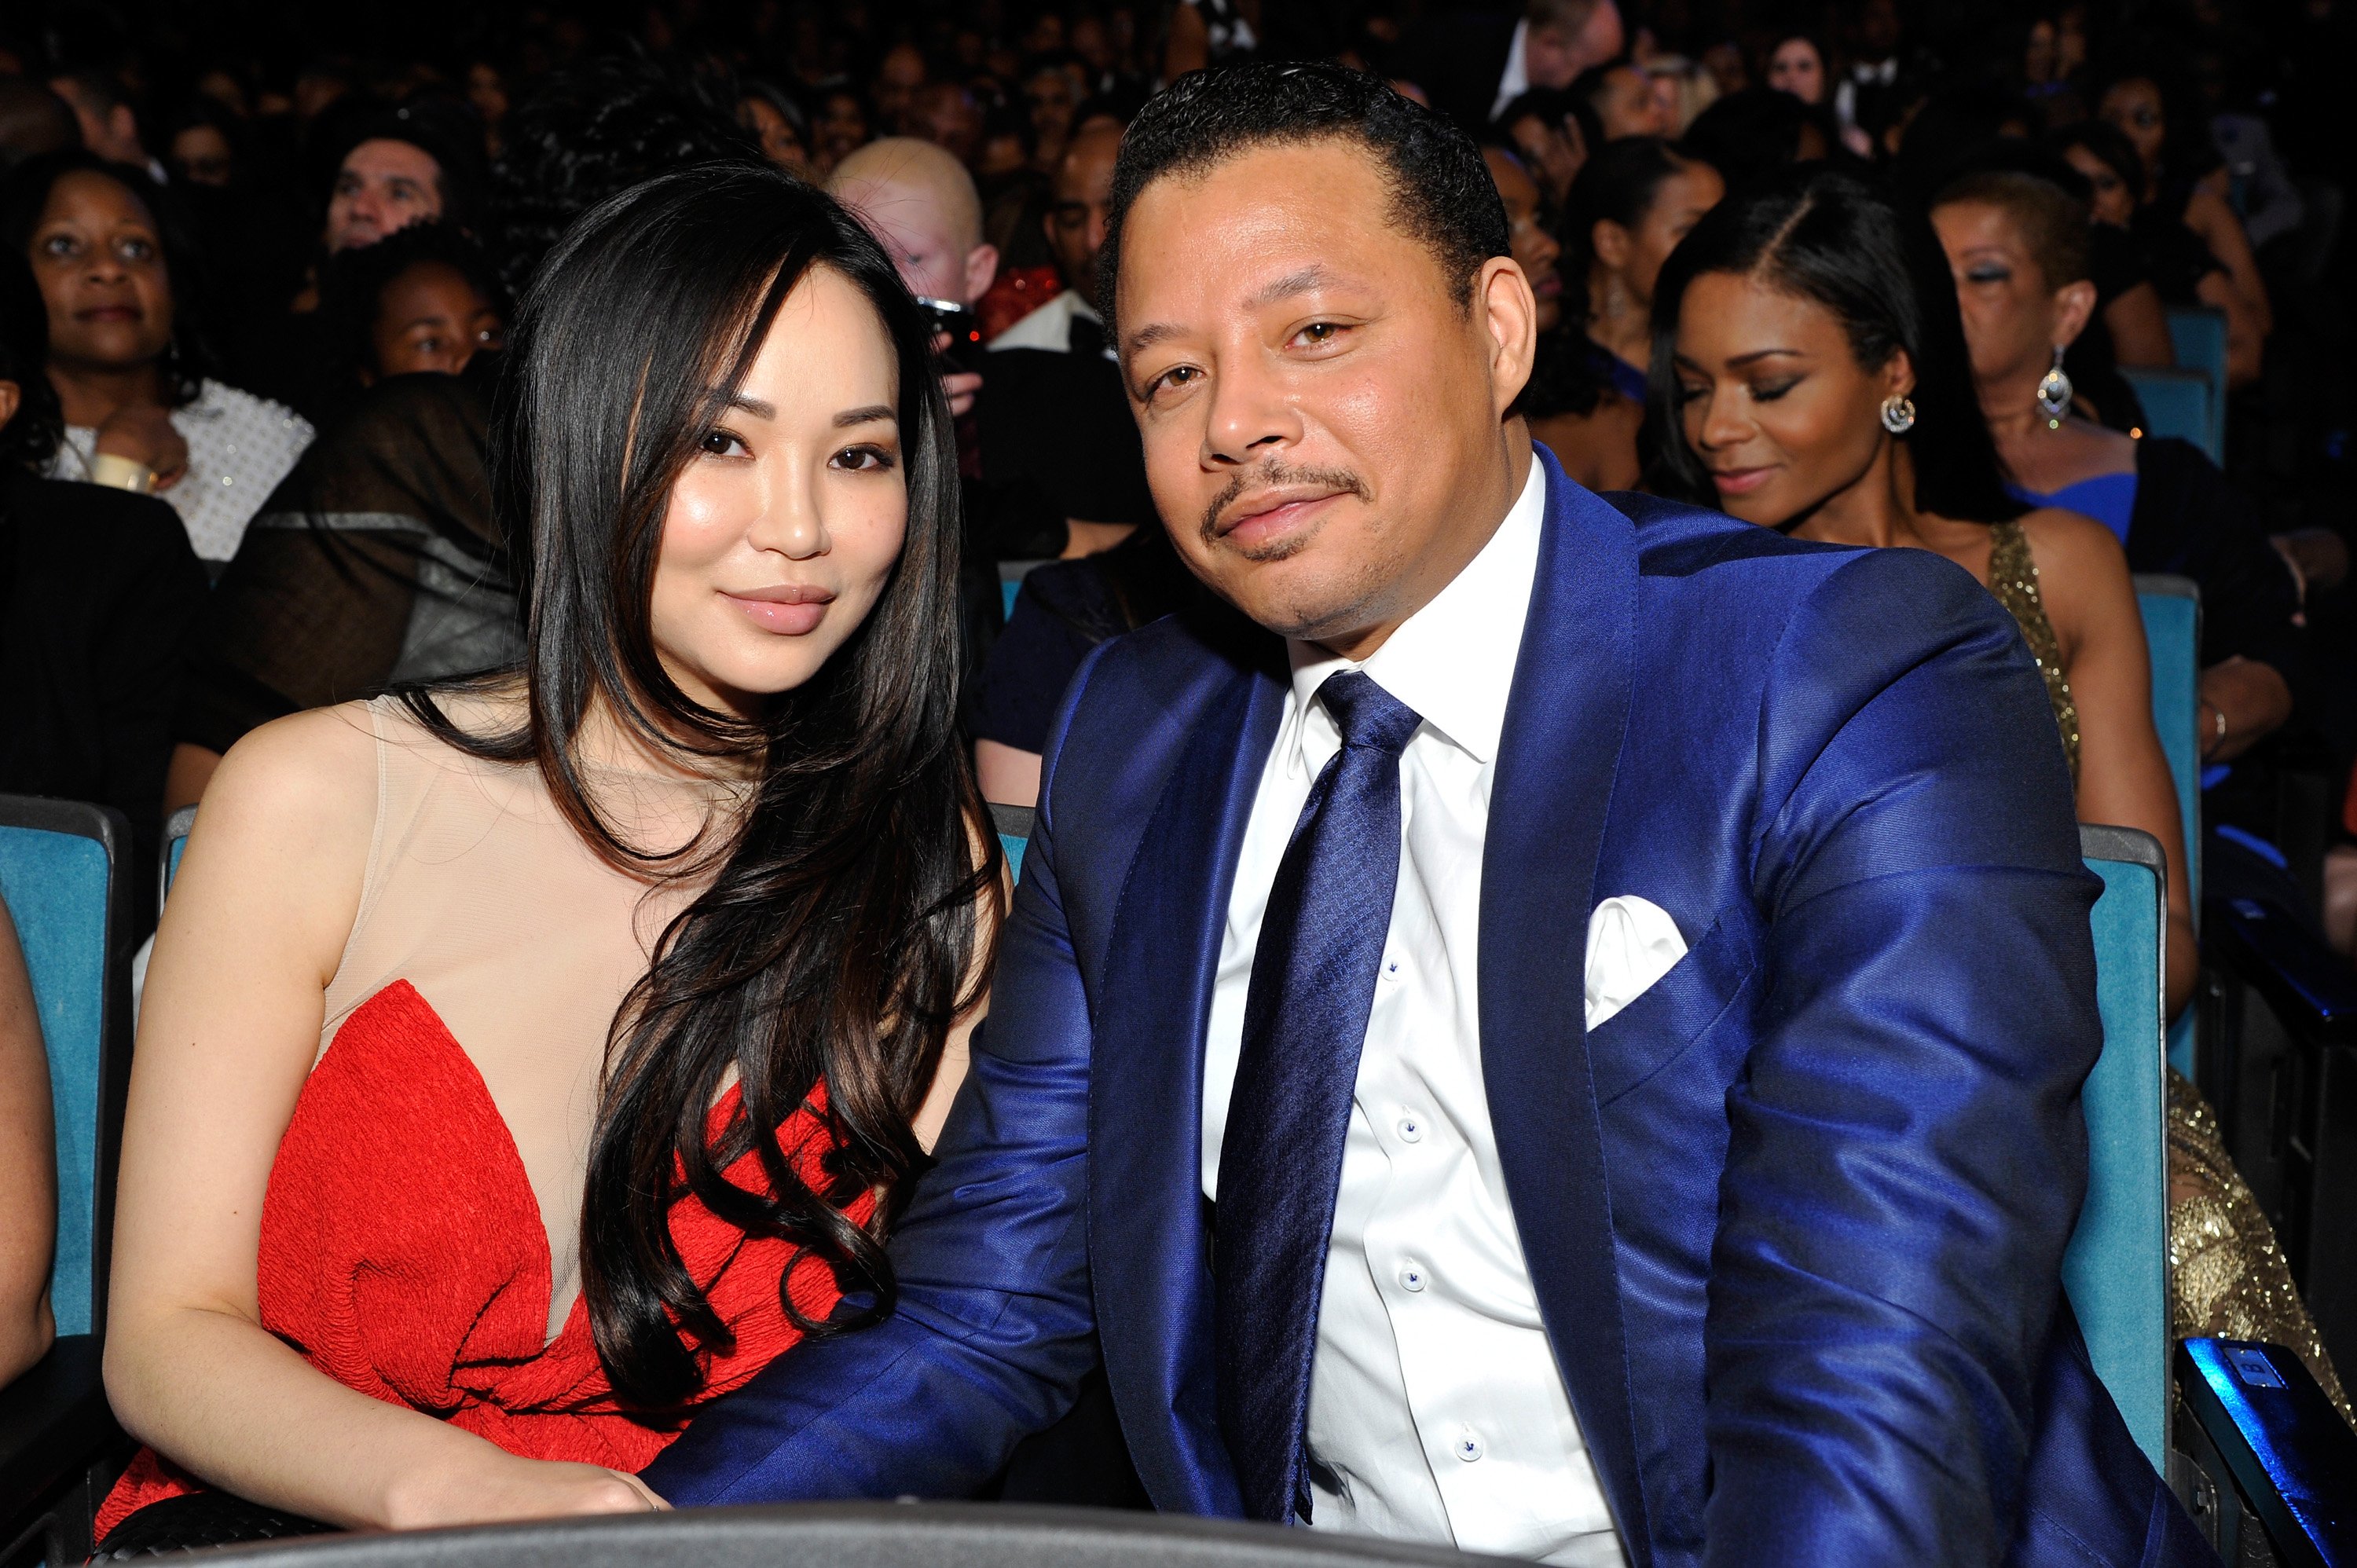 Terrence Howard (R) and Mira Christine Pak attend the 45th NAACP Image Awards presented by TV One at Pasadena Civic Auditorium, on February 22, 2014, in Pasadena, California. | Source: Getty Images